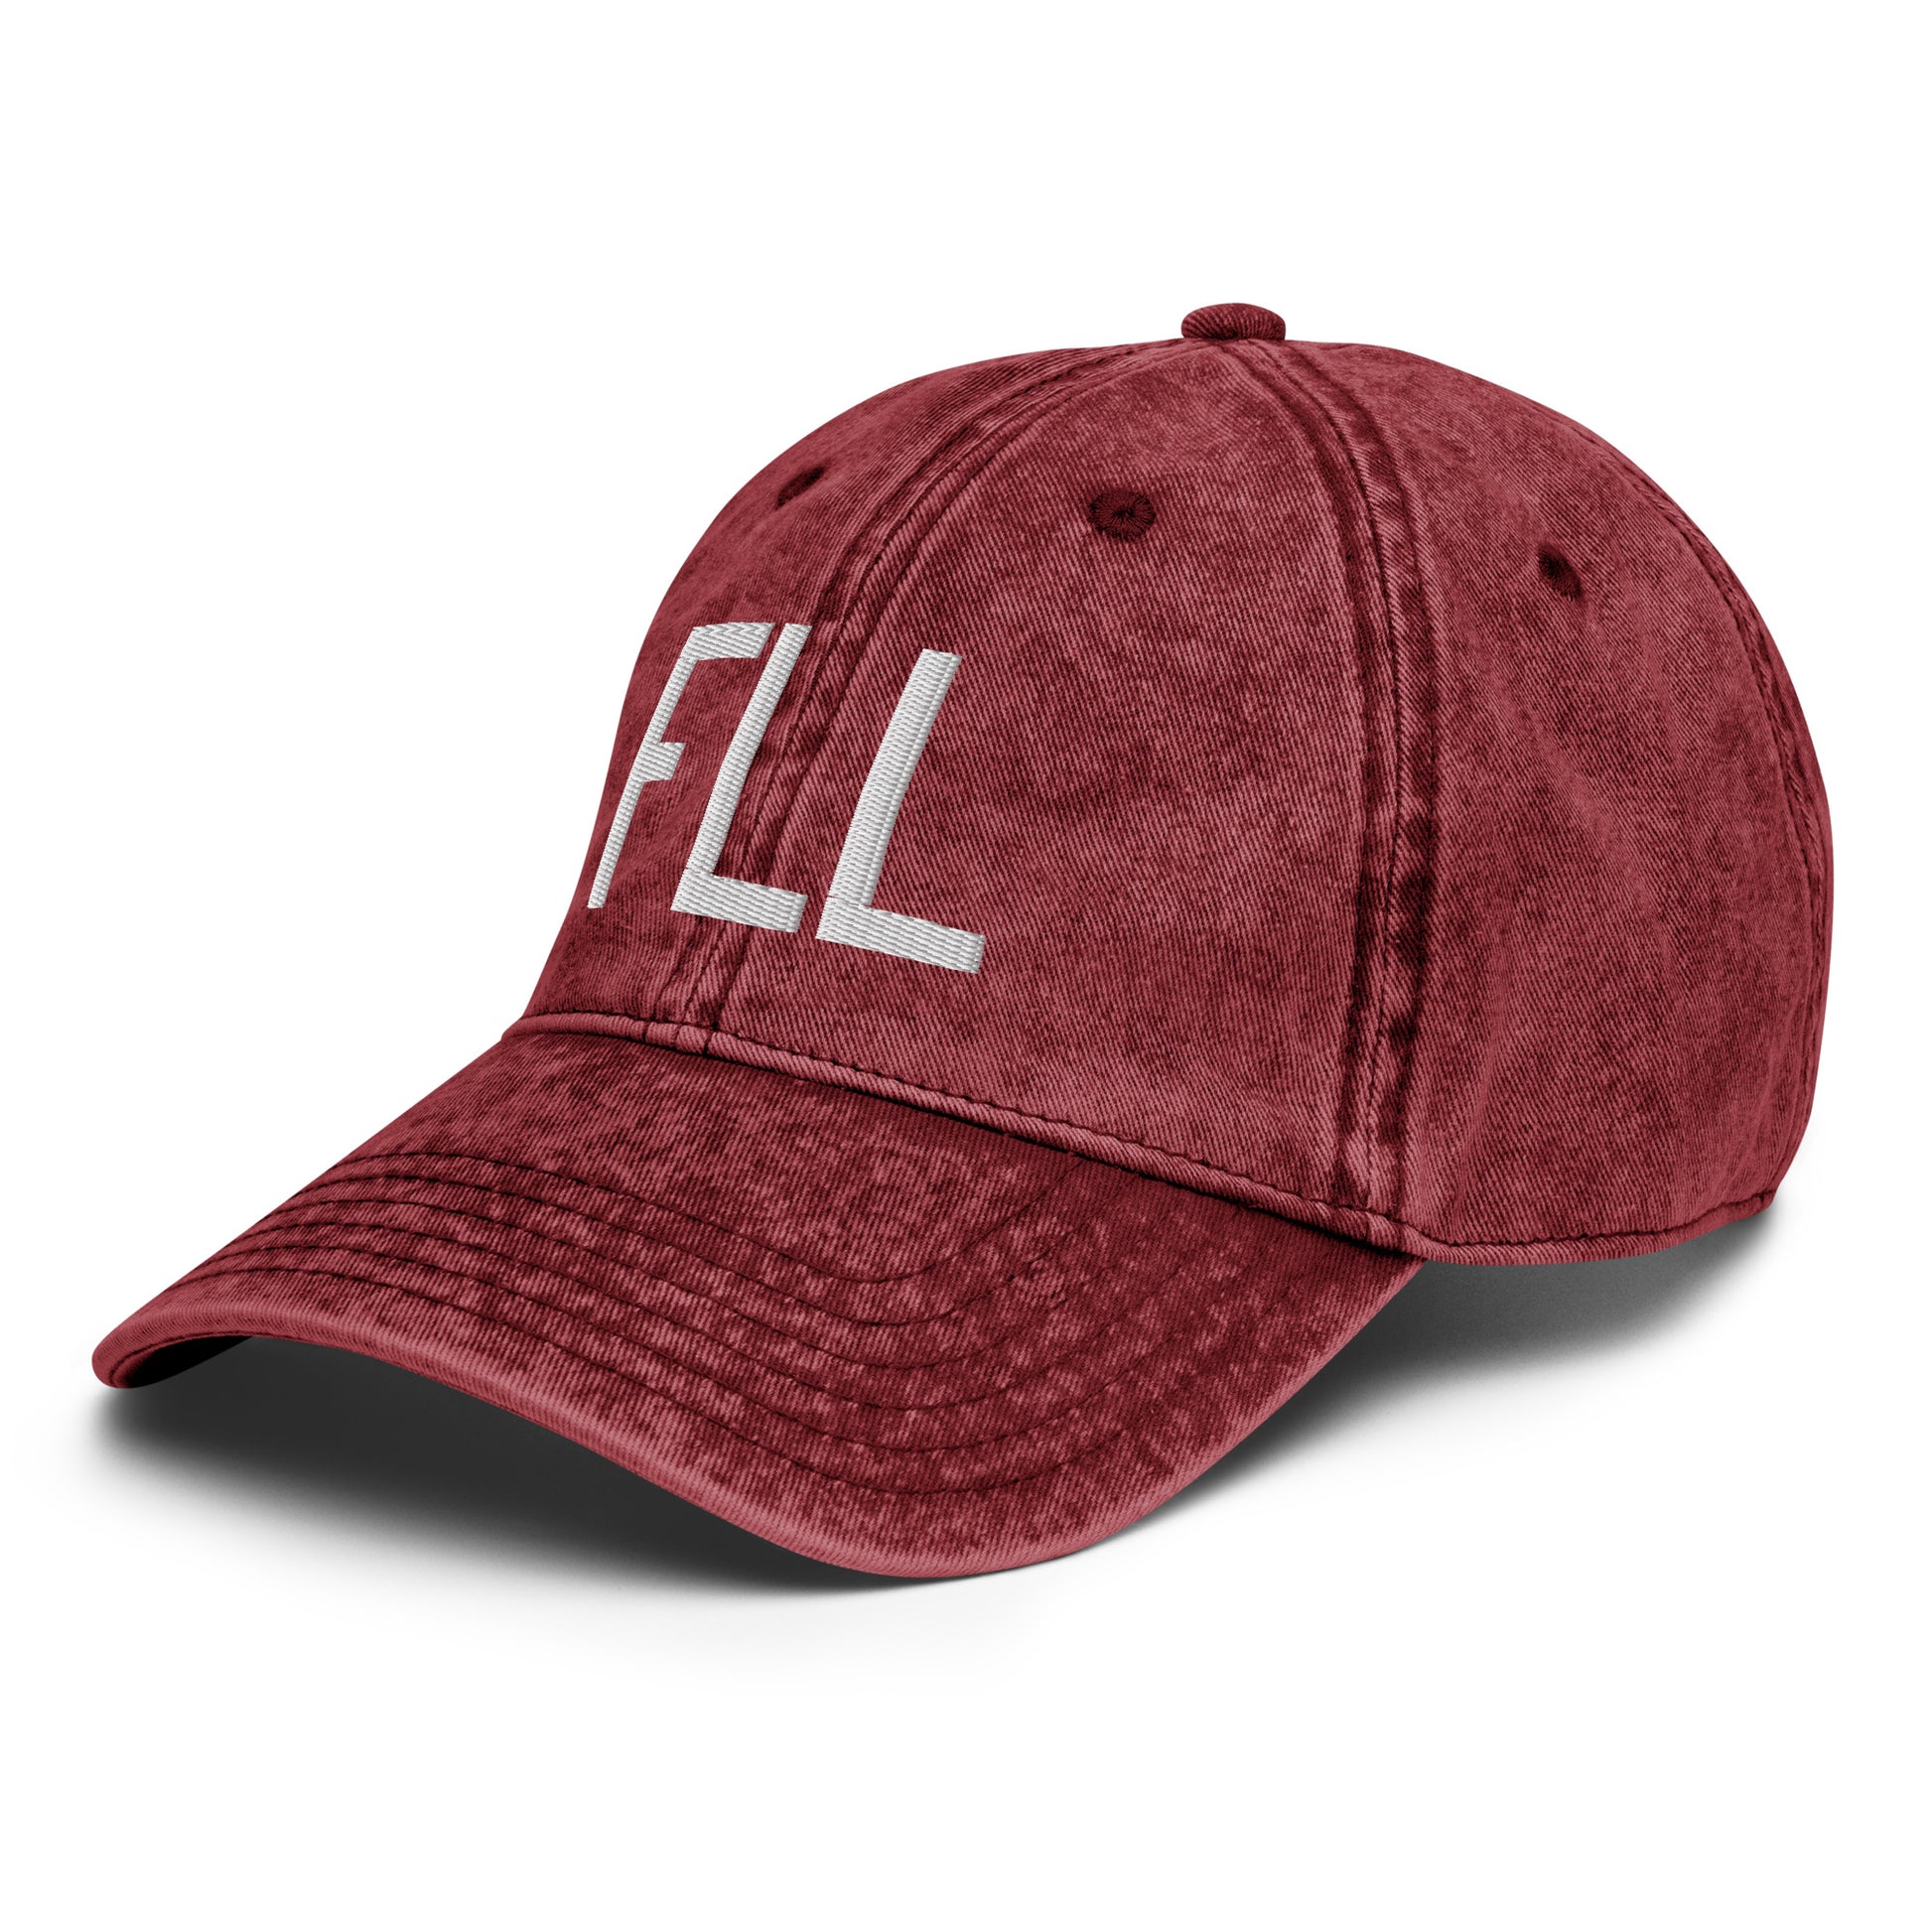 Airport Code Twill Cap - White • FLL Fort Lauderdale • YHM Designs - Image 20